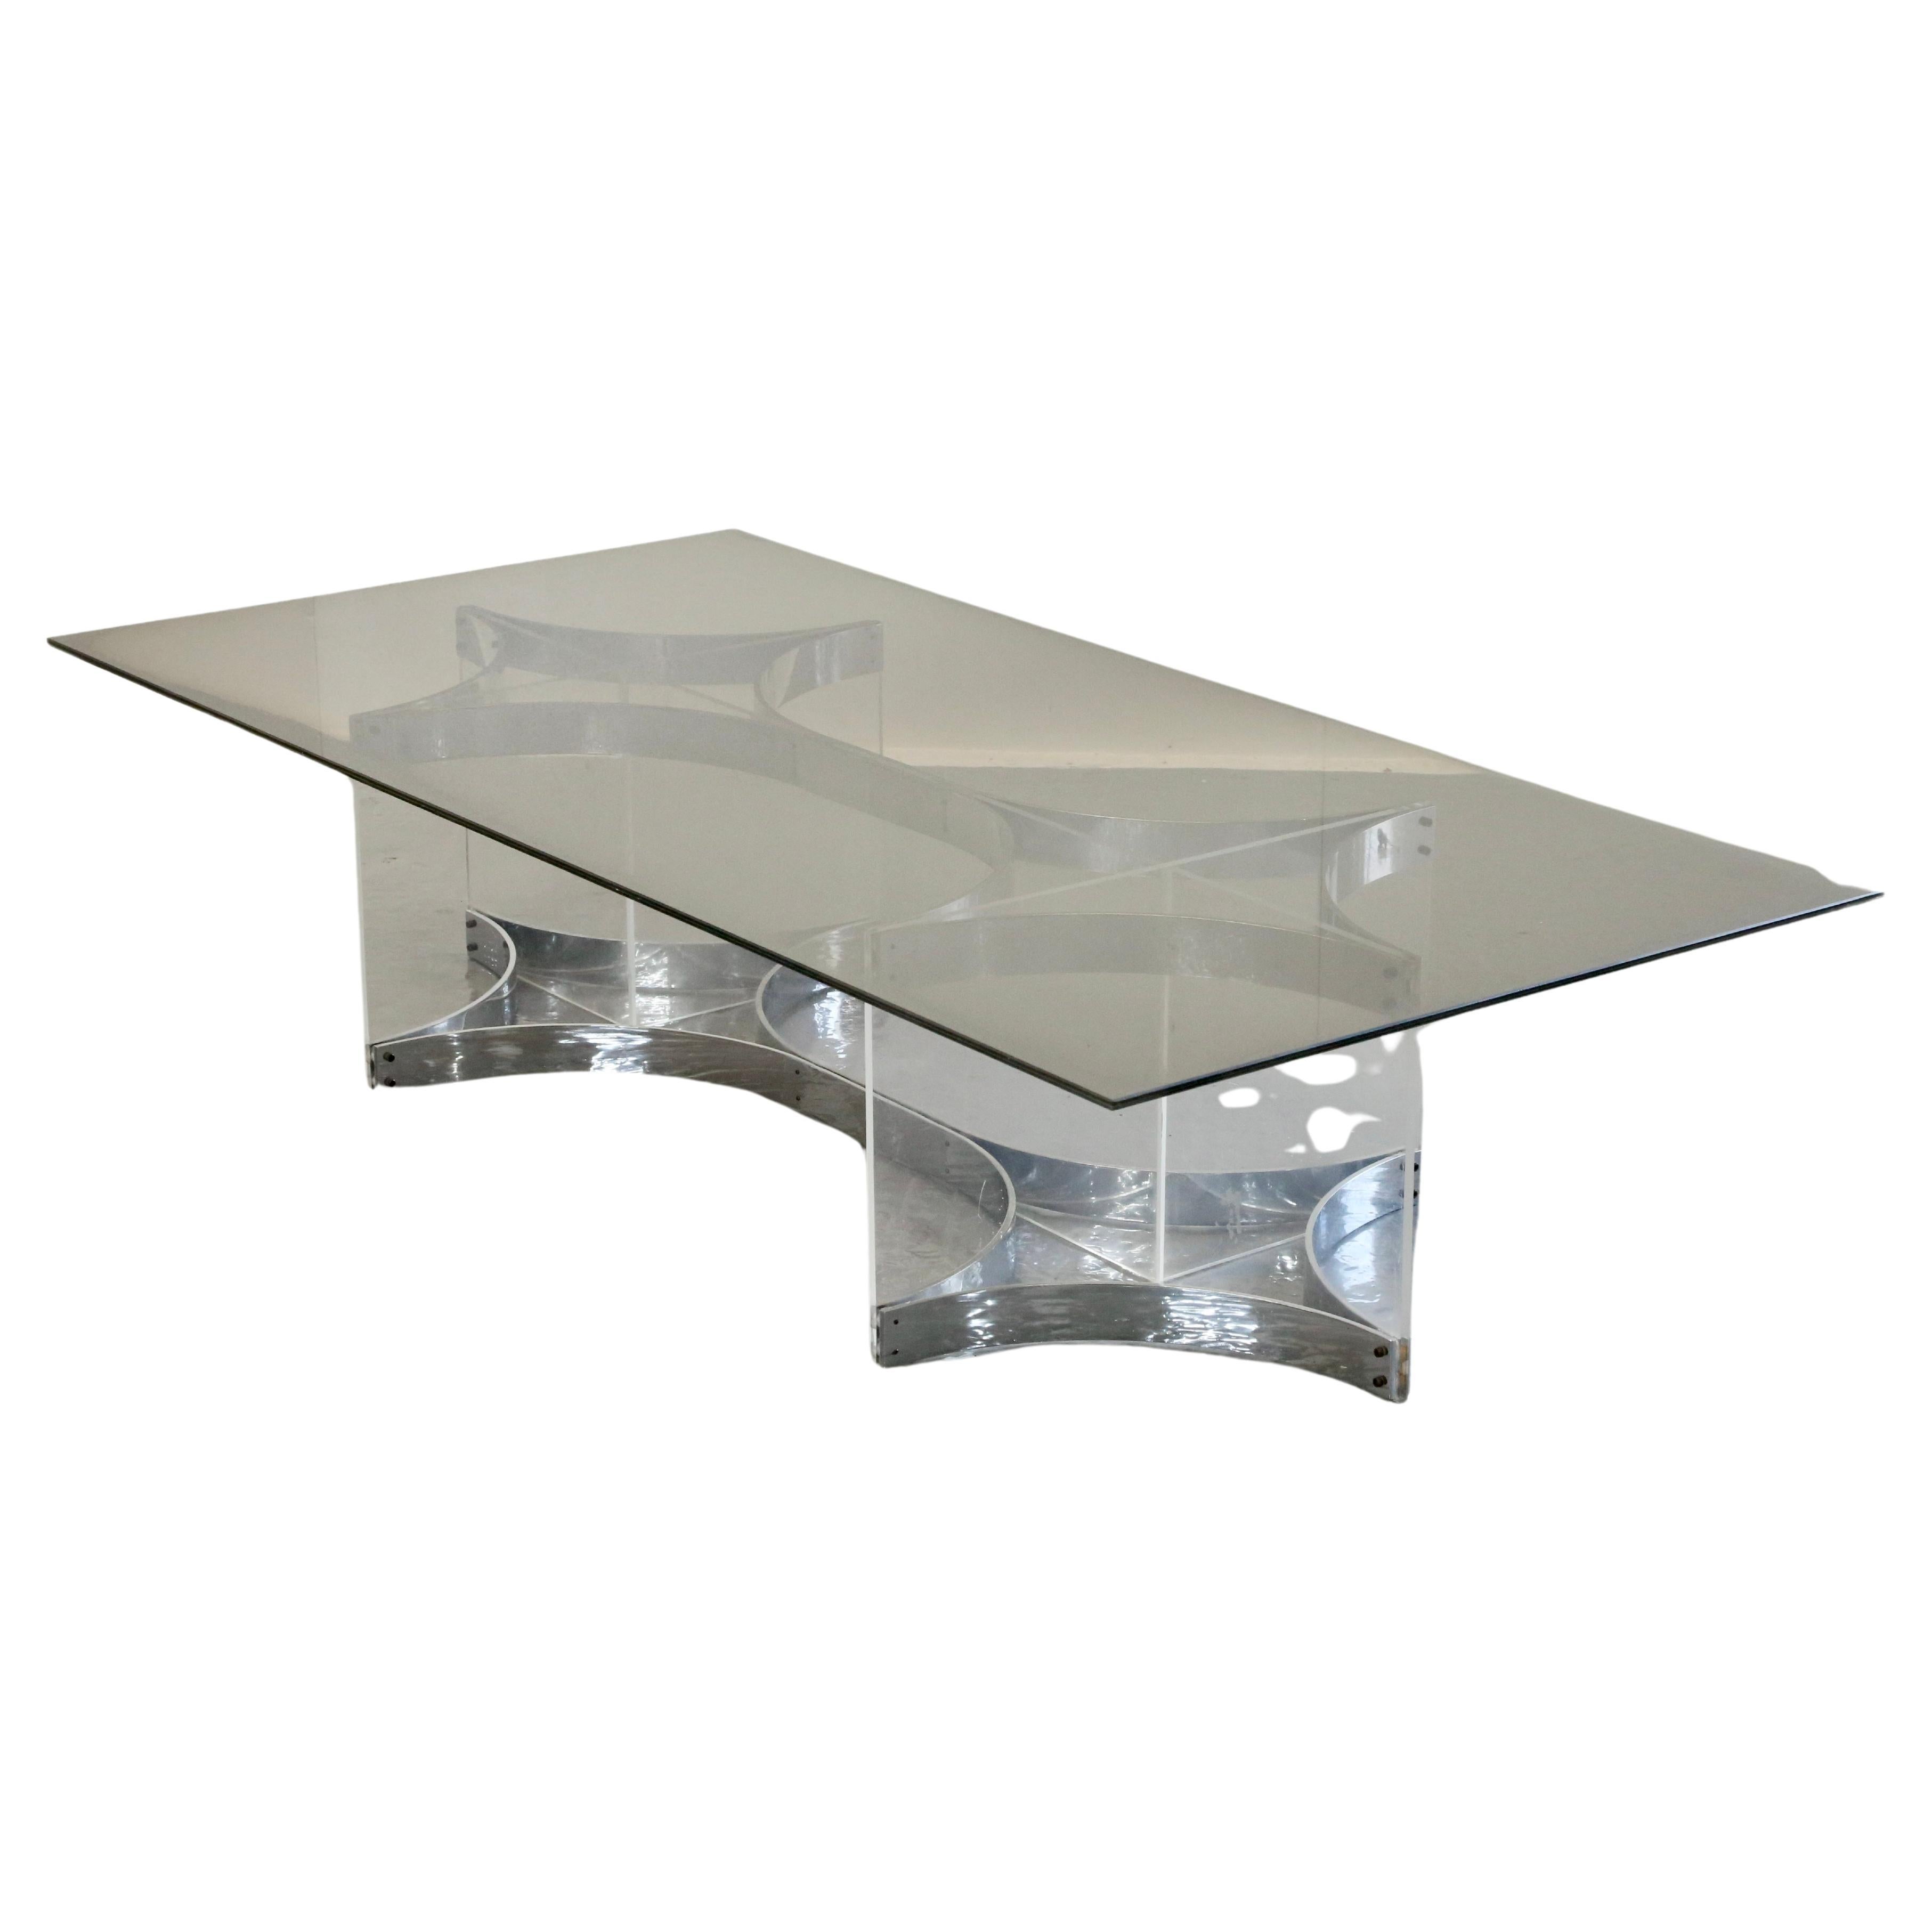 Alessandro Albrizzi, Fine Mid Century Chrome Plated Steel & Lucite Coffee Table